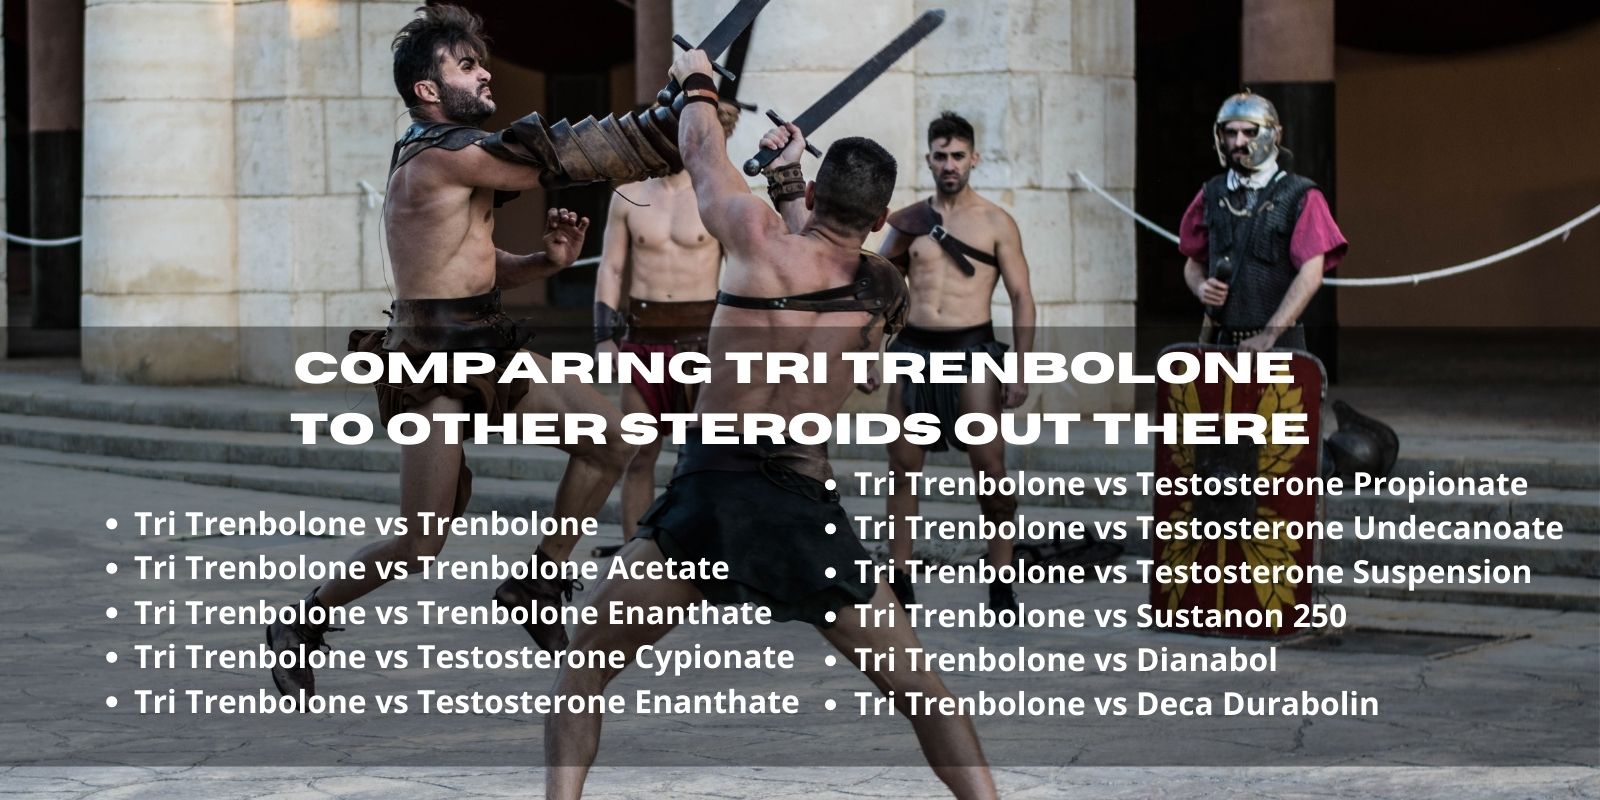 Comparing Tri Trenbolone to other steroids out there